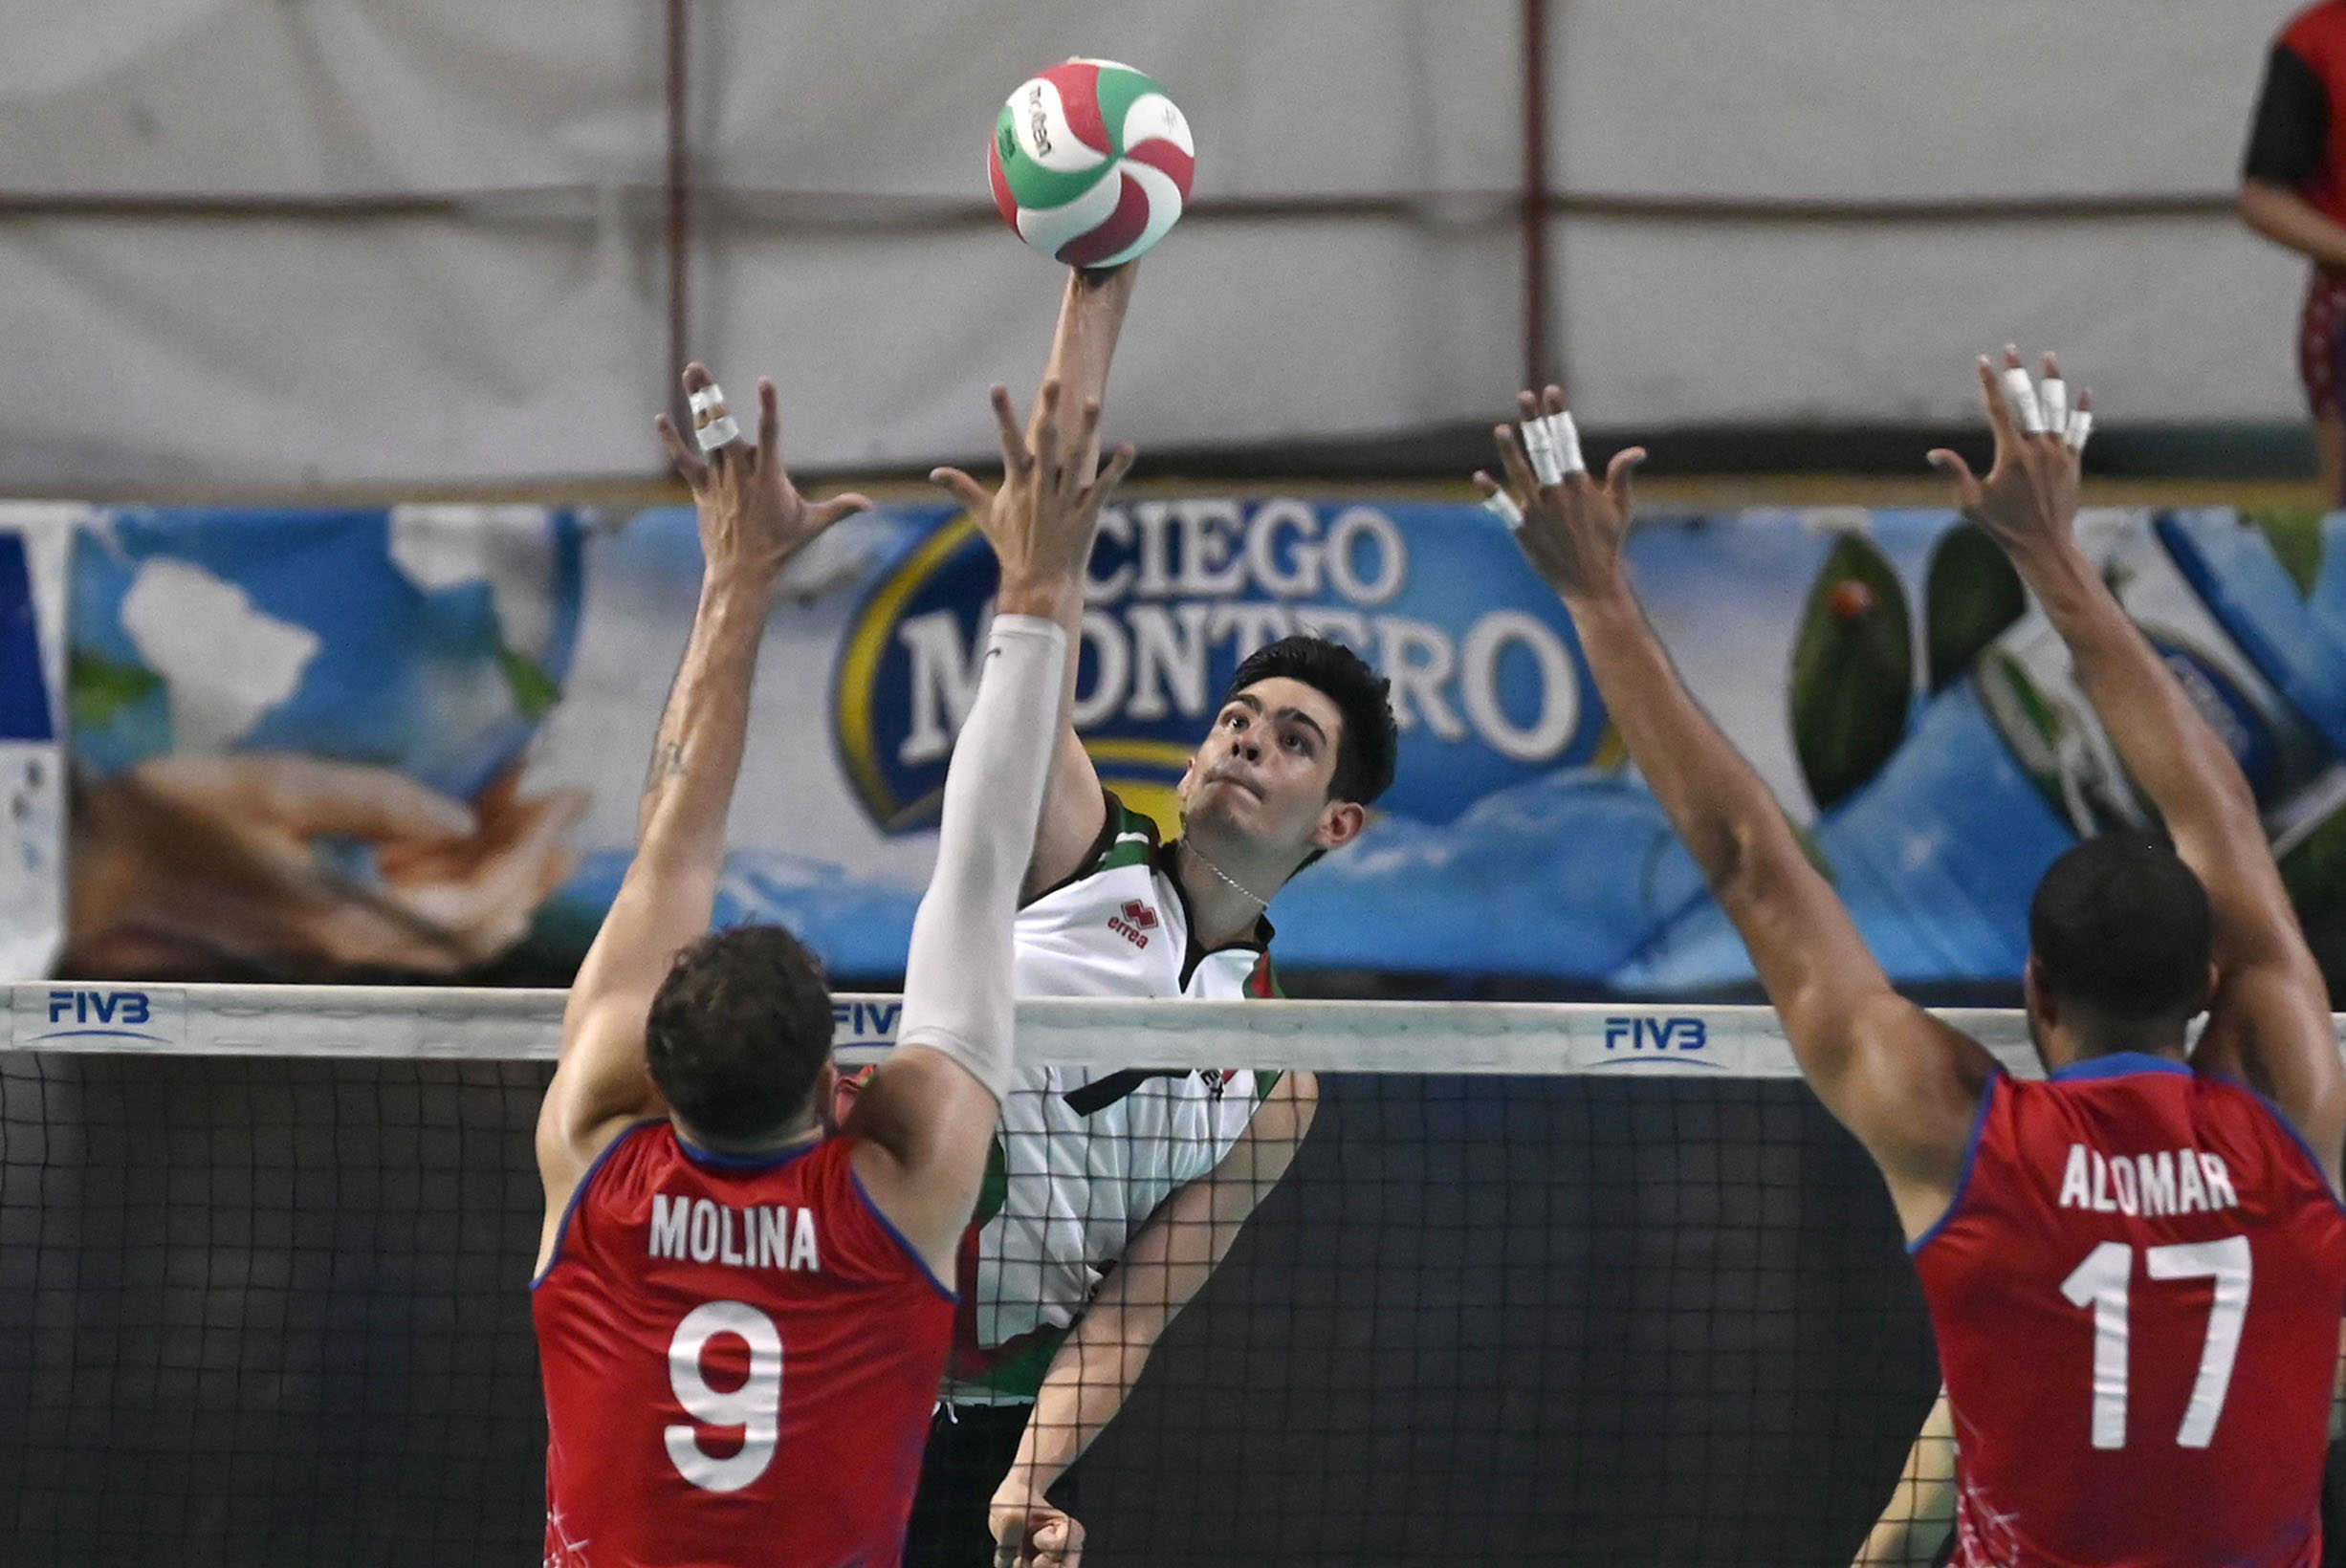 Mexico defeated Puerto Rico in a hard-fought tie-break 